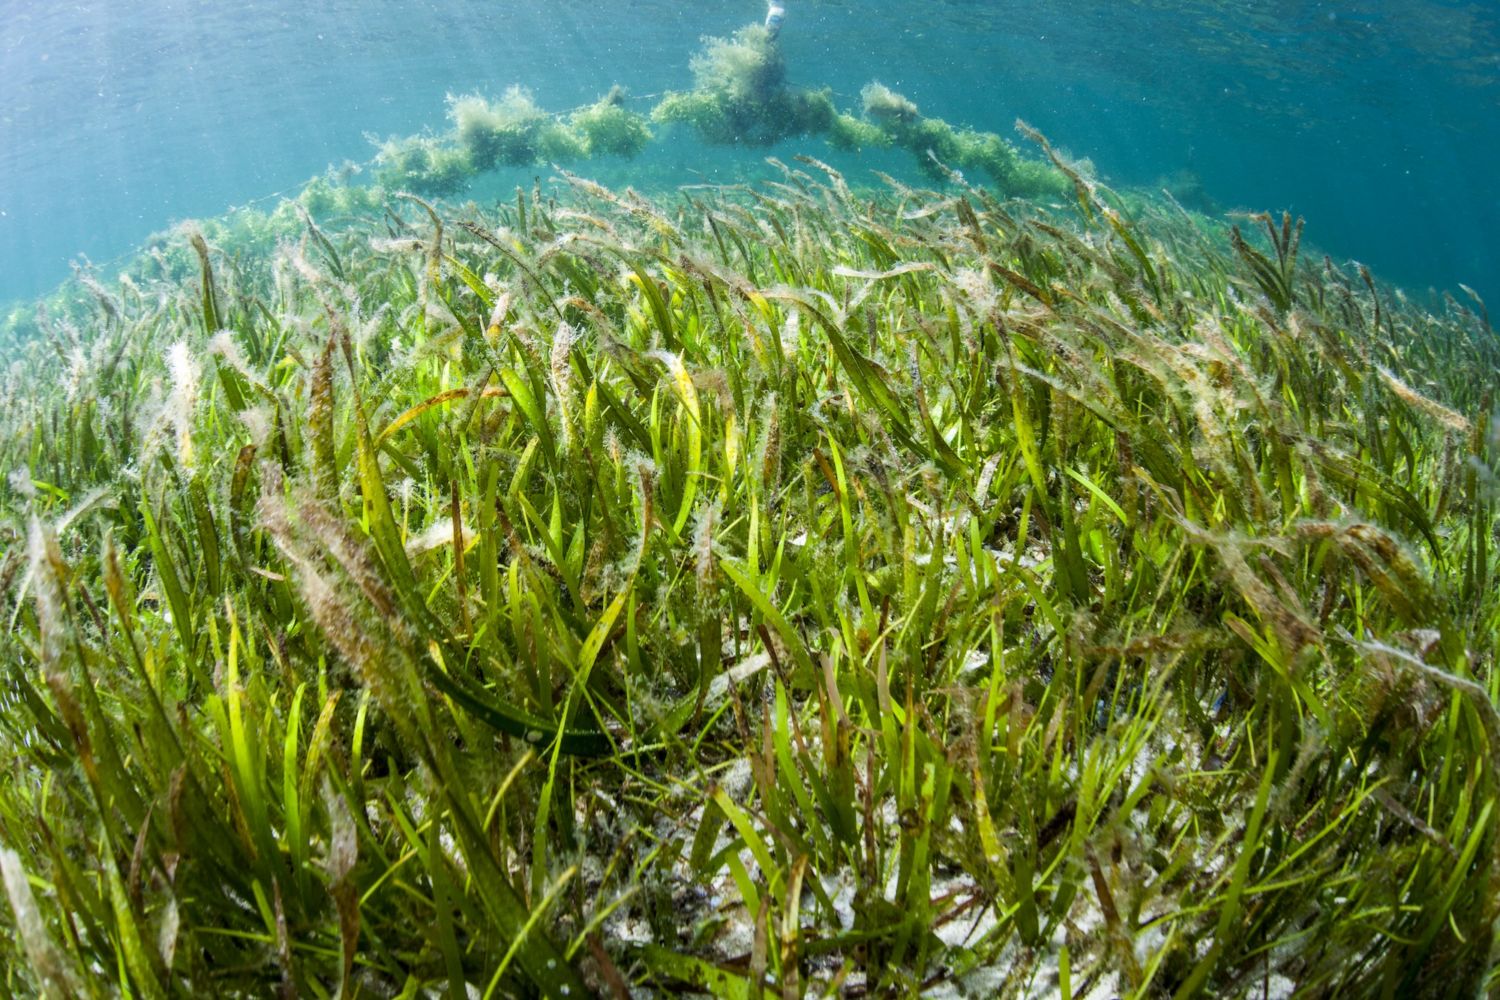 Noise Pollution Affects Practically Everything, Even Seagrass